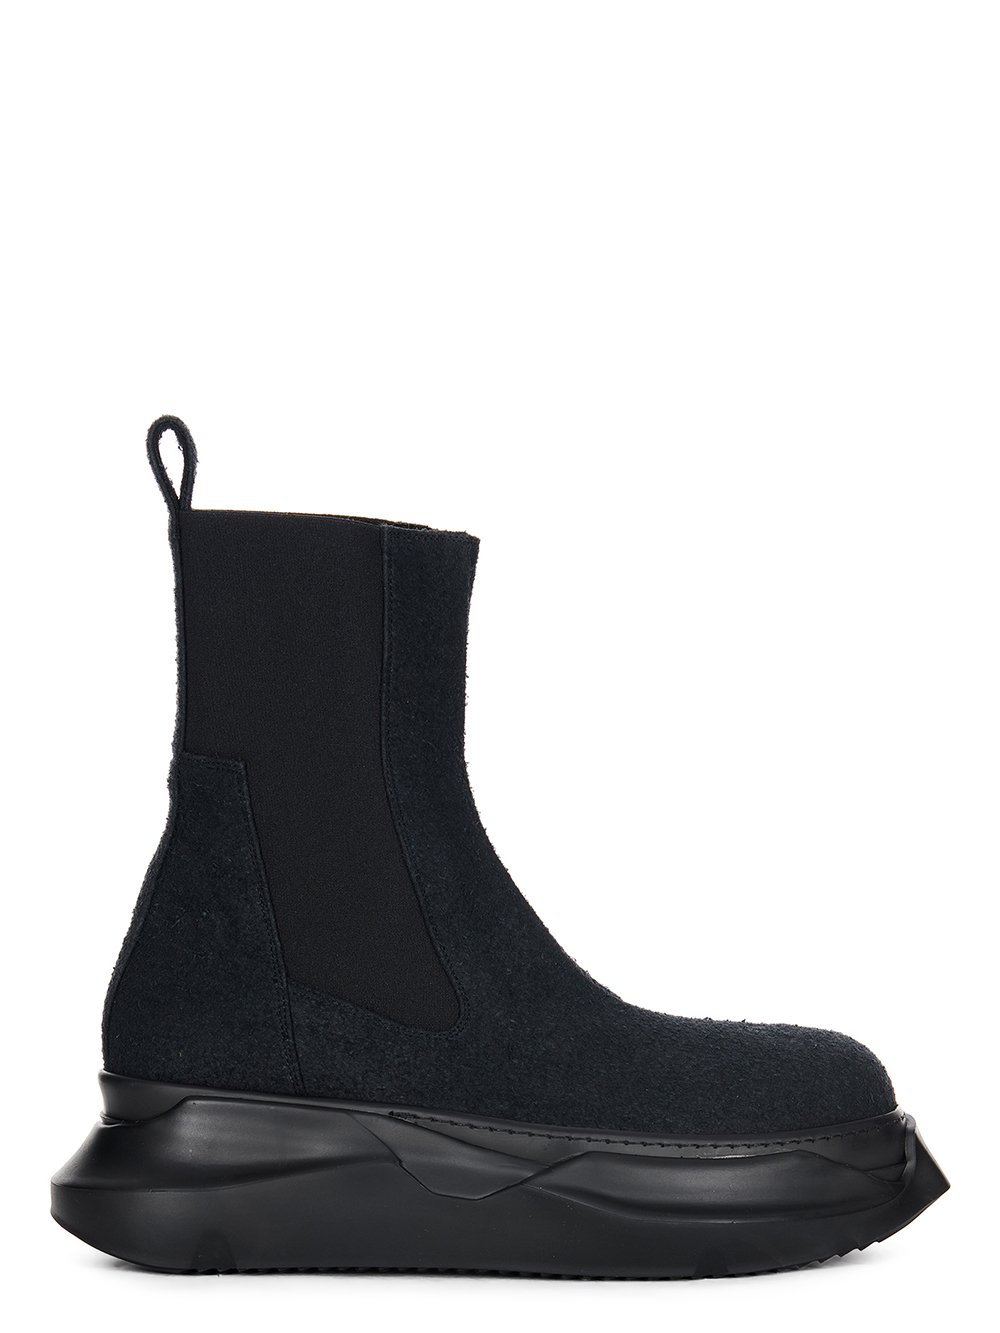 RICK OWENS FW23 LUXOR BEATLE ABSTRACT IN BLACK SHAGGY COTTON SUEDE